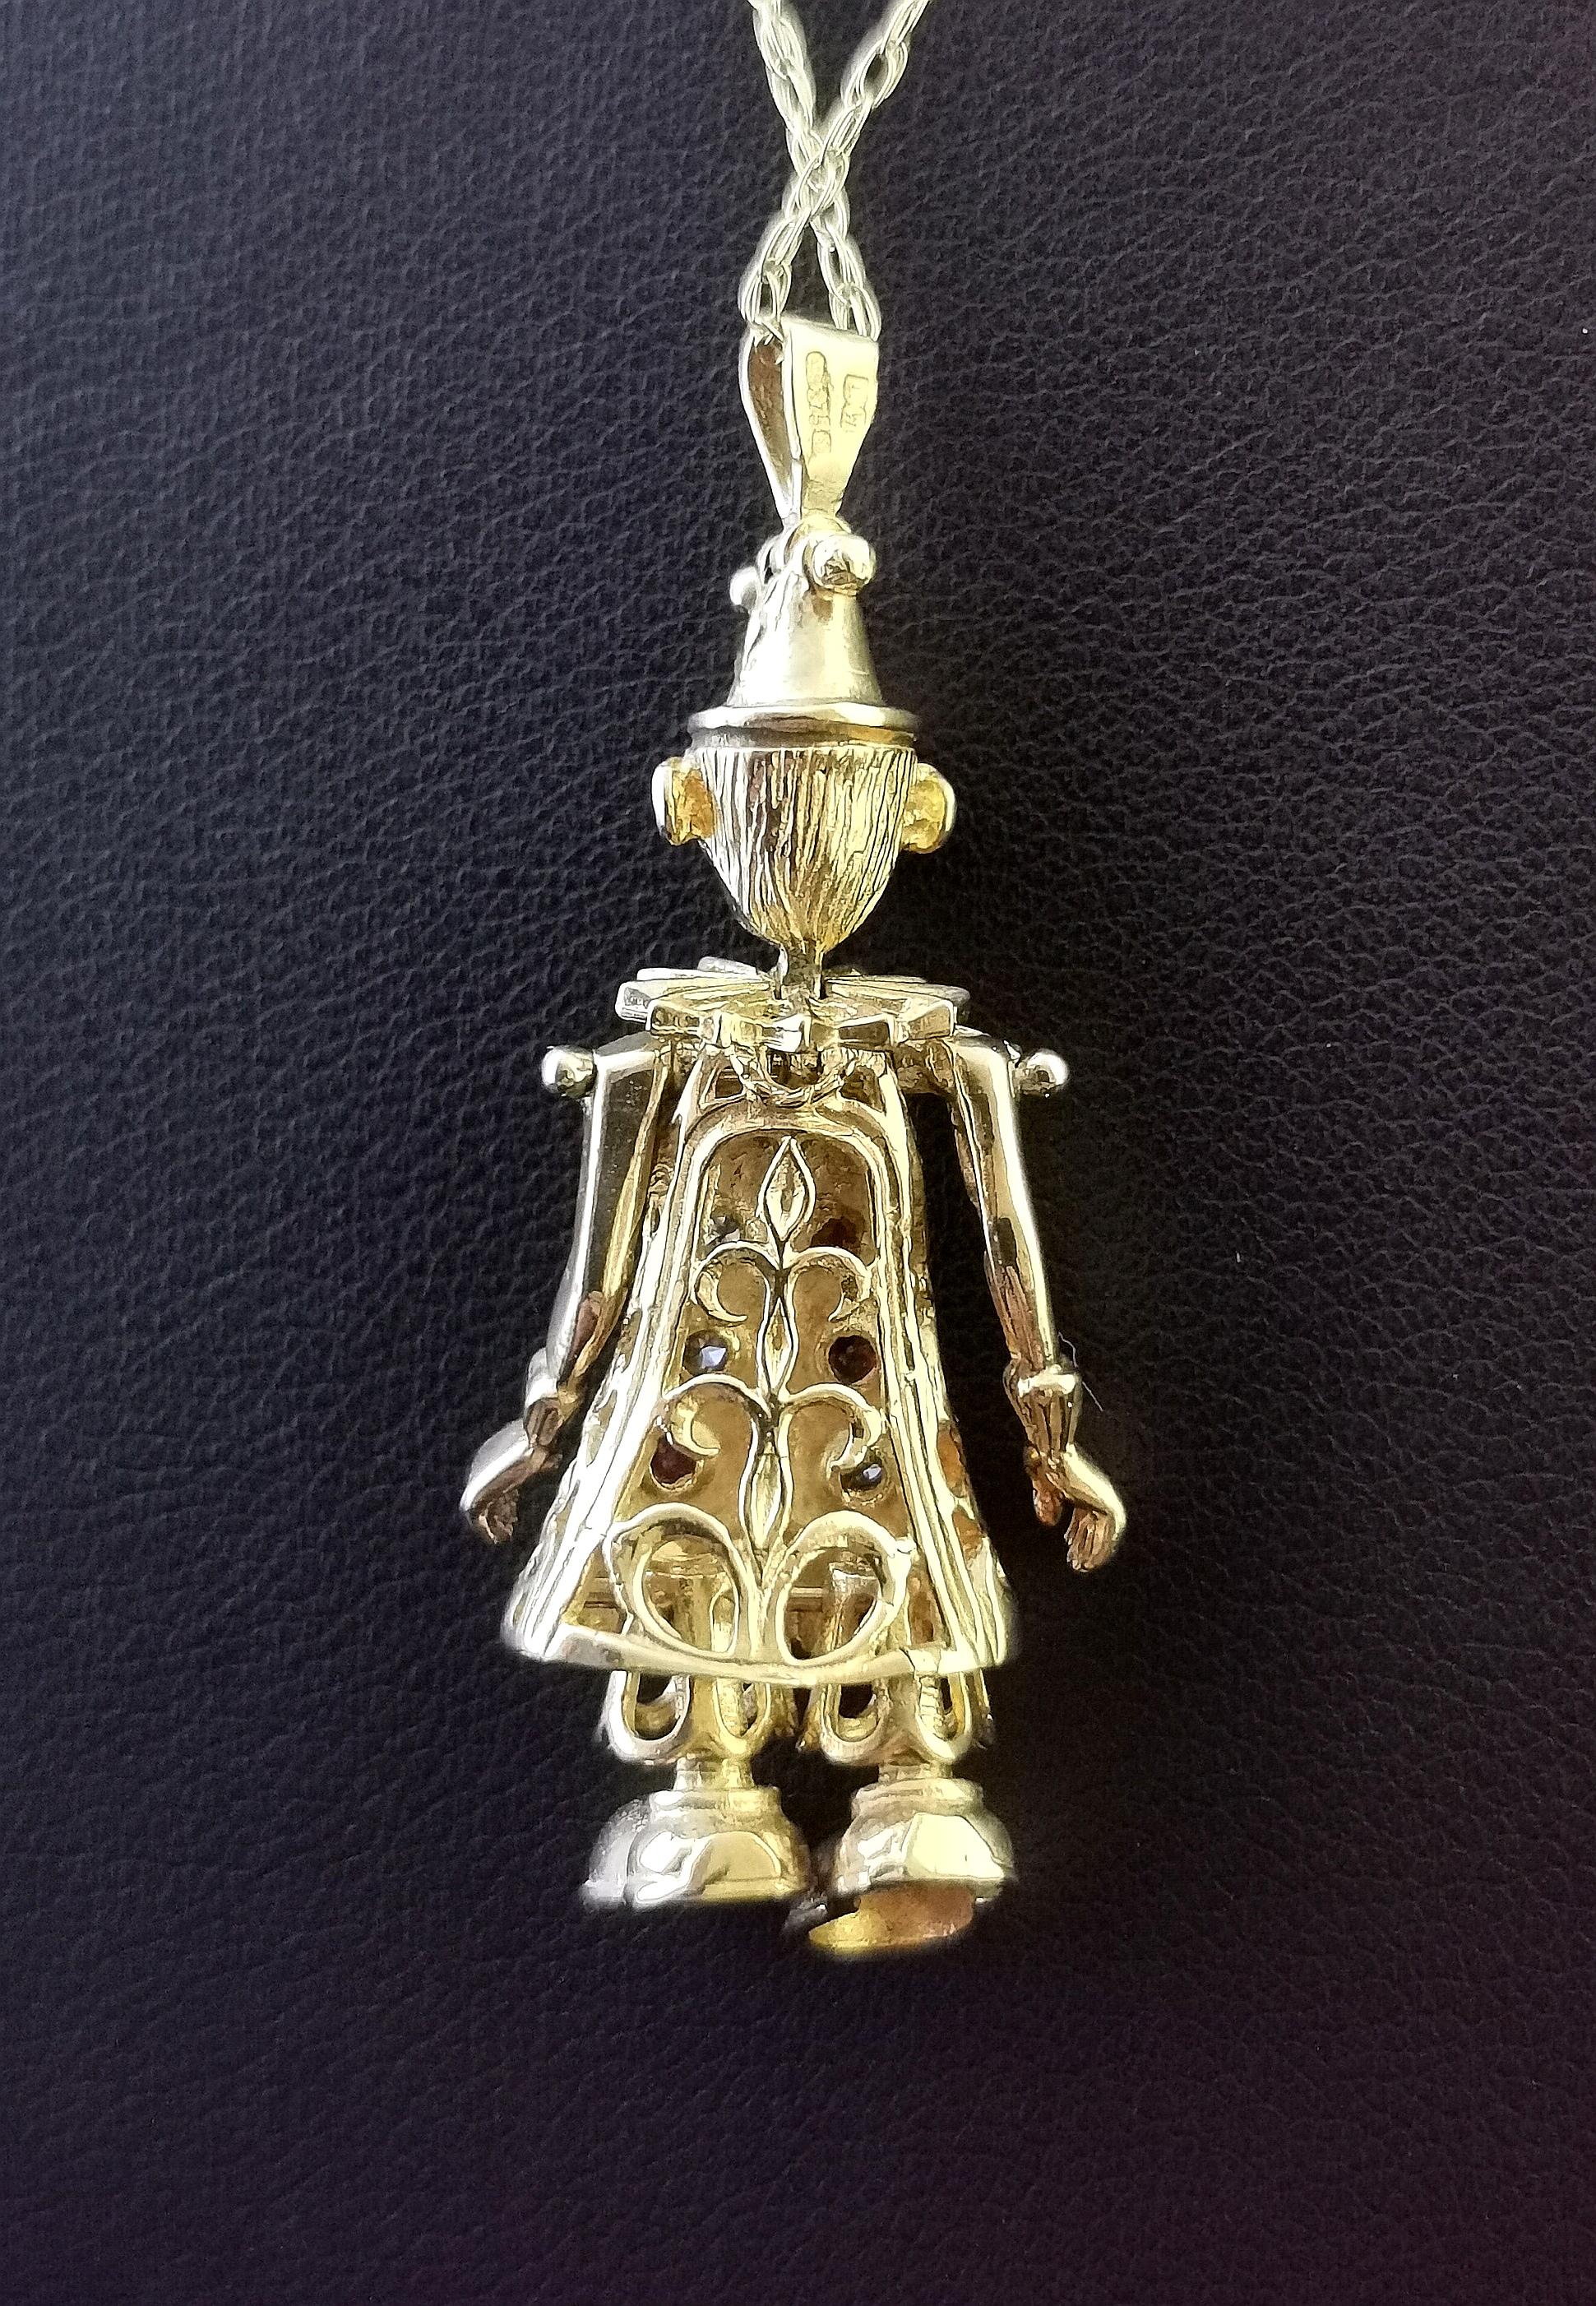 Vintage 9 Karat Yellow Gold Clown Pendant, Trace Link Necklace, Articulated 4